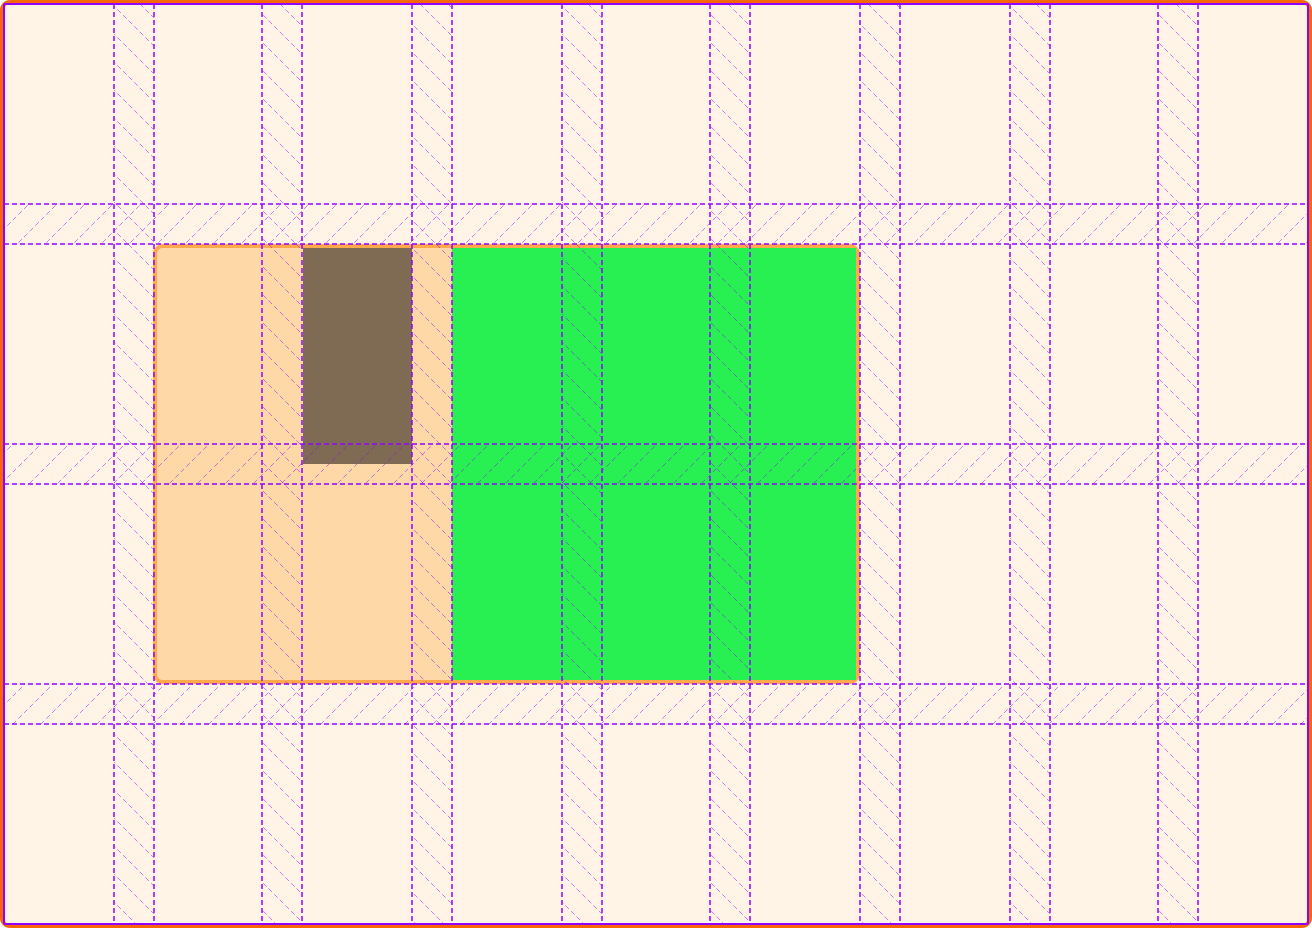 The smaller item displays in the gap as row-gap is set to 0 on the subgrid.